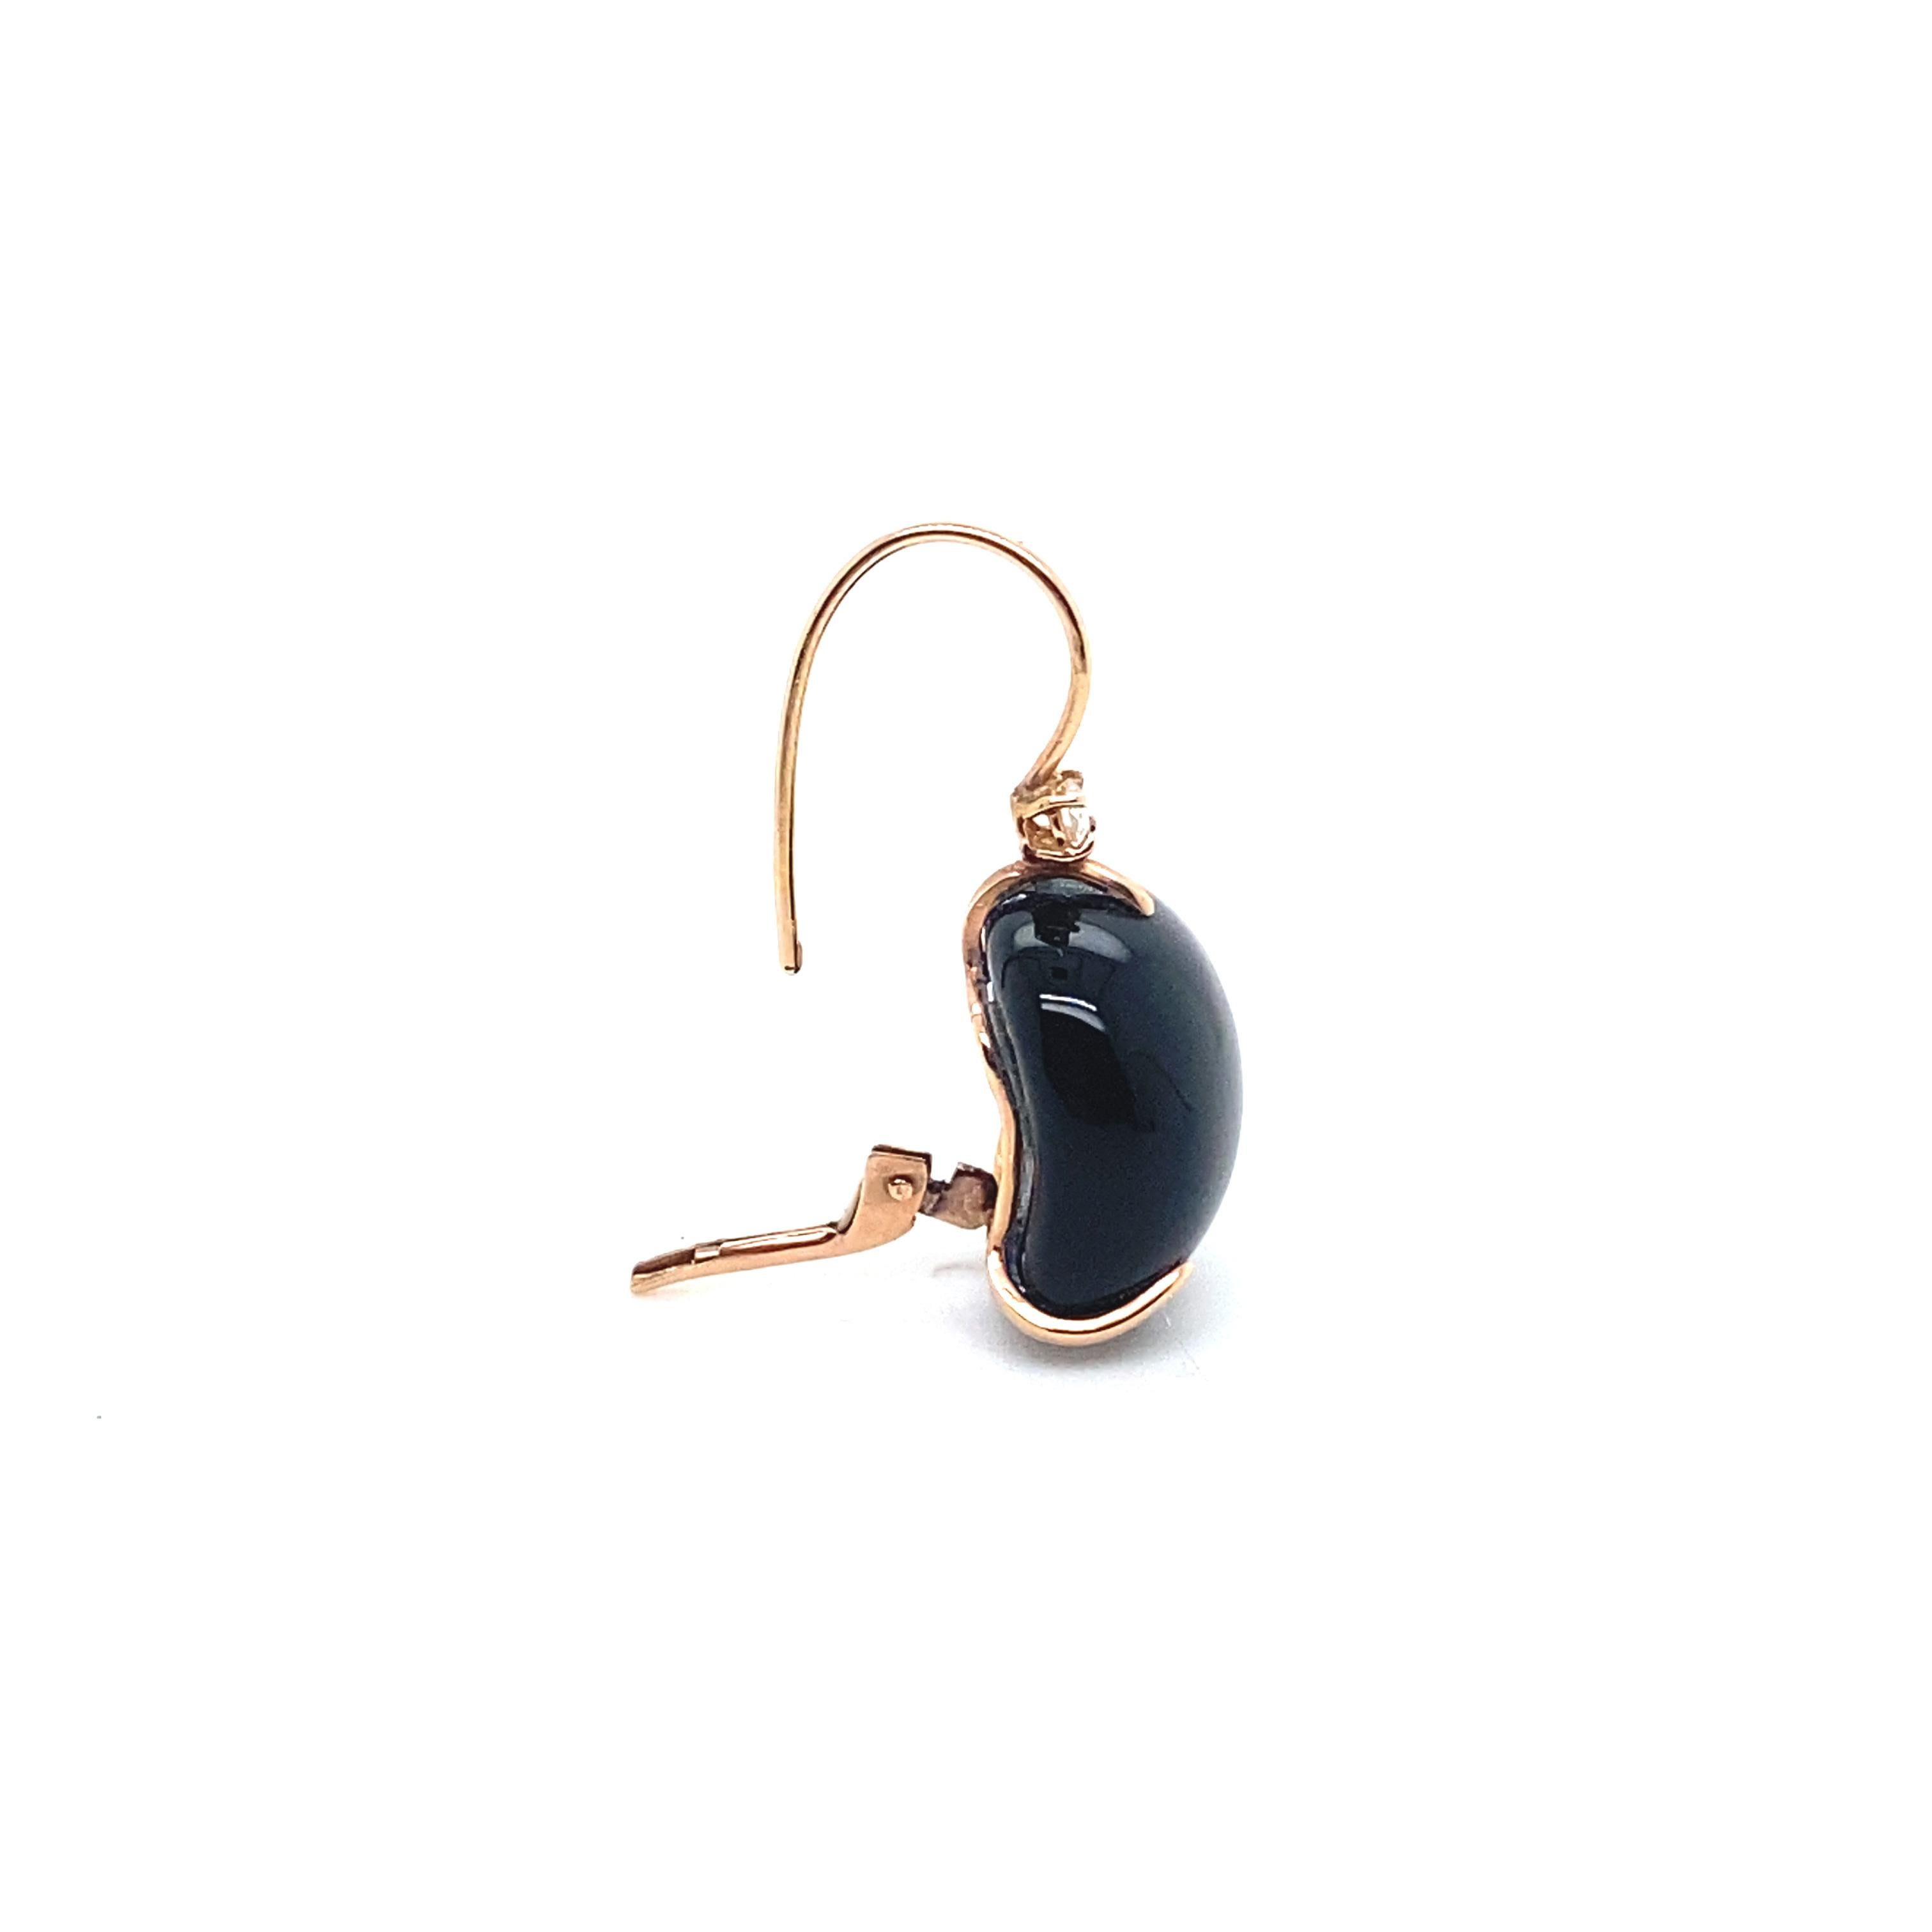 Discover our magnificent pair of earrings in 18-carat rose gold, featuring an elegant black quartz and a sparkling diamond. These exquisite earrings combine the brilliance of precious gold, the mysterious beauty of black quartz and the sparkling